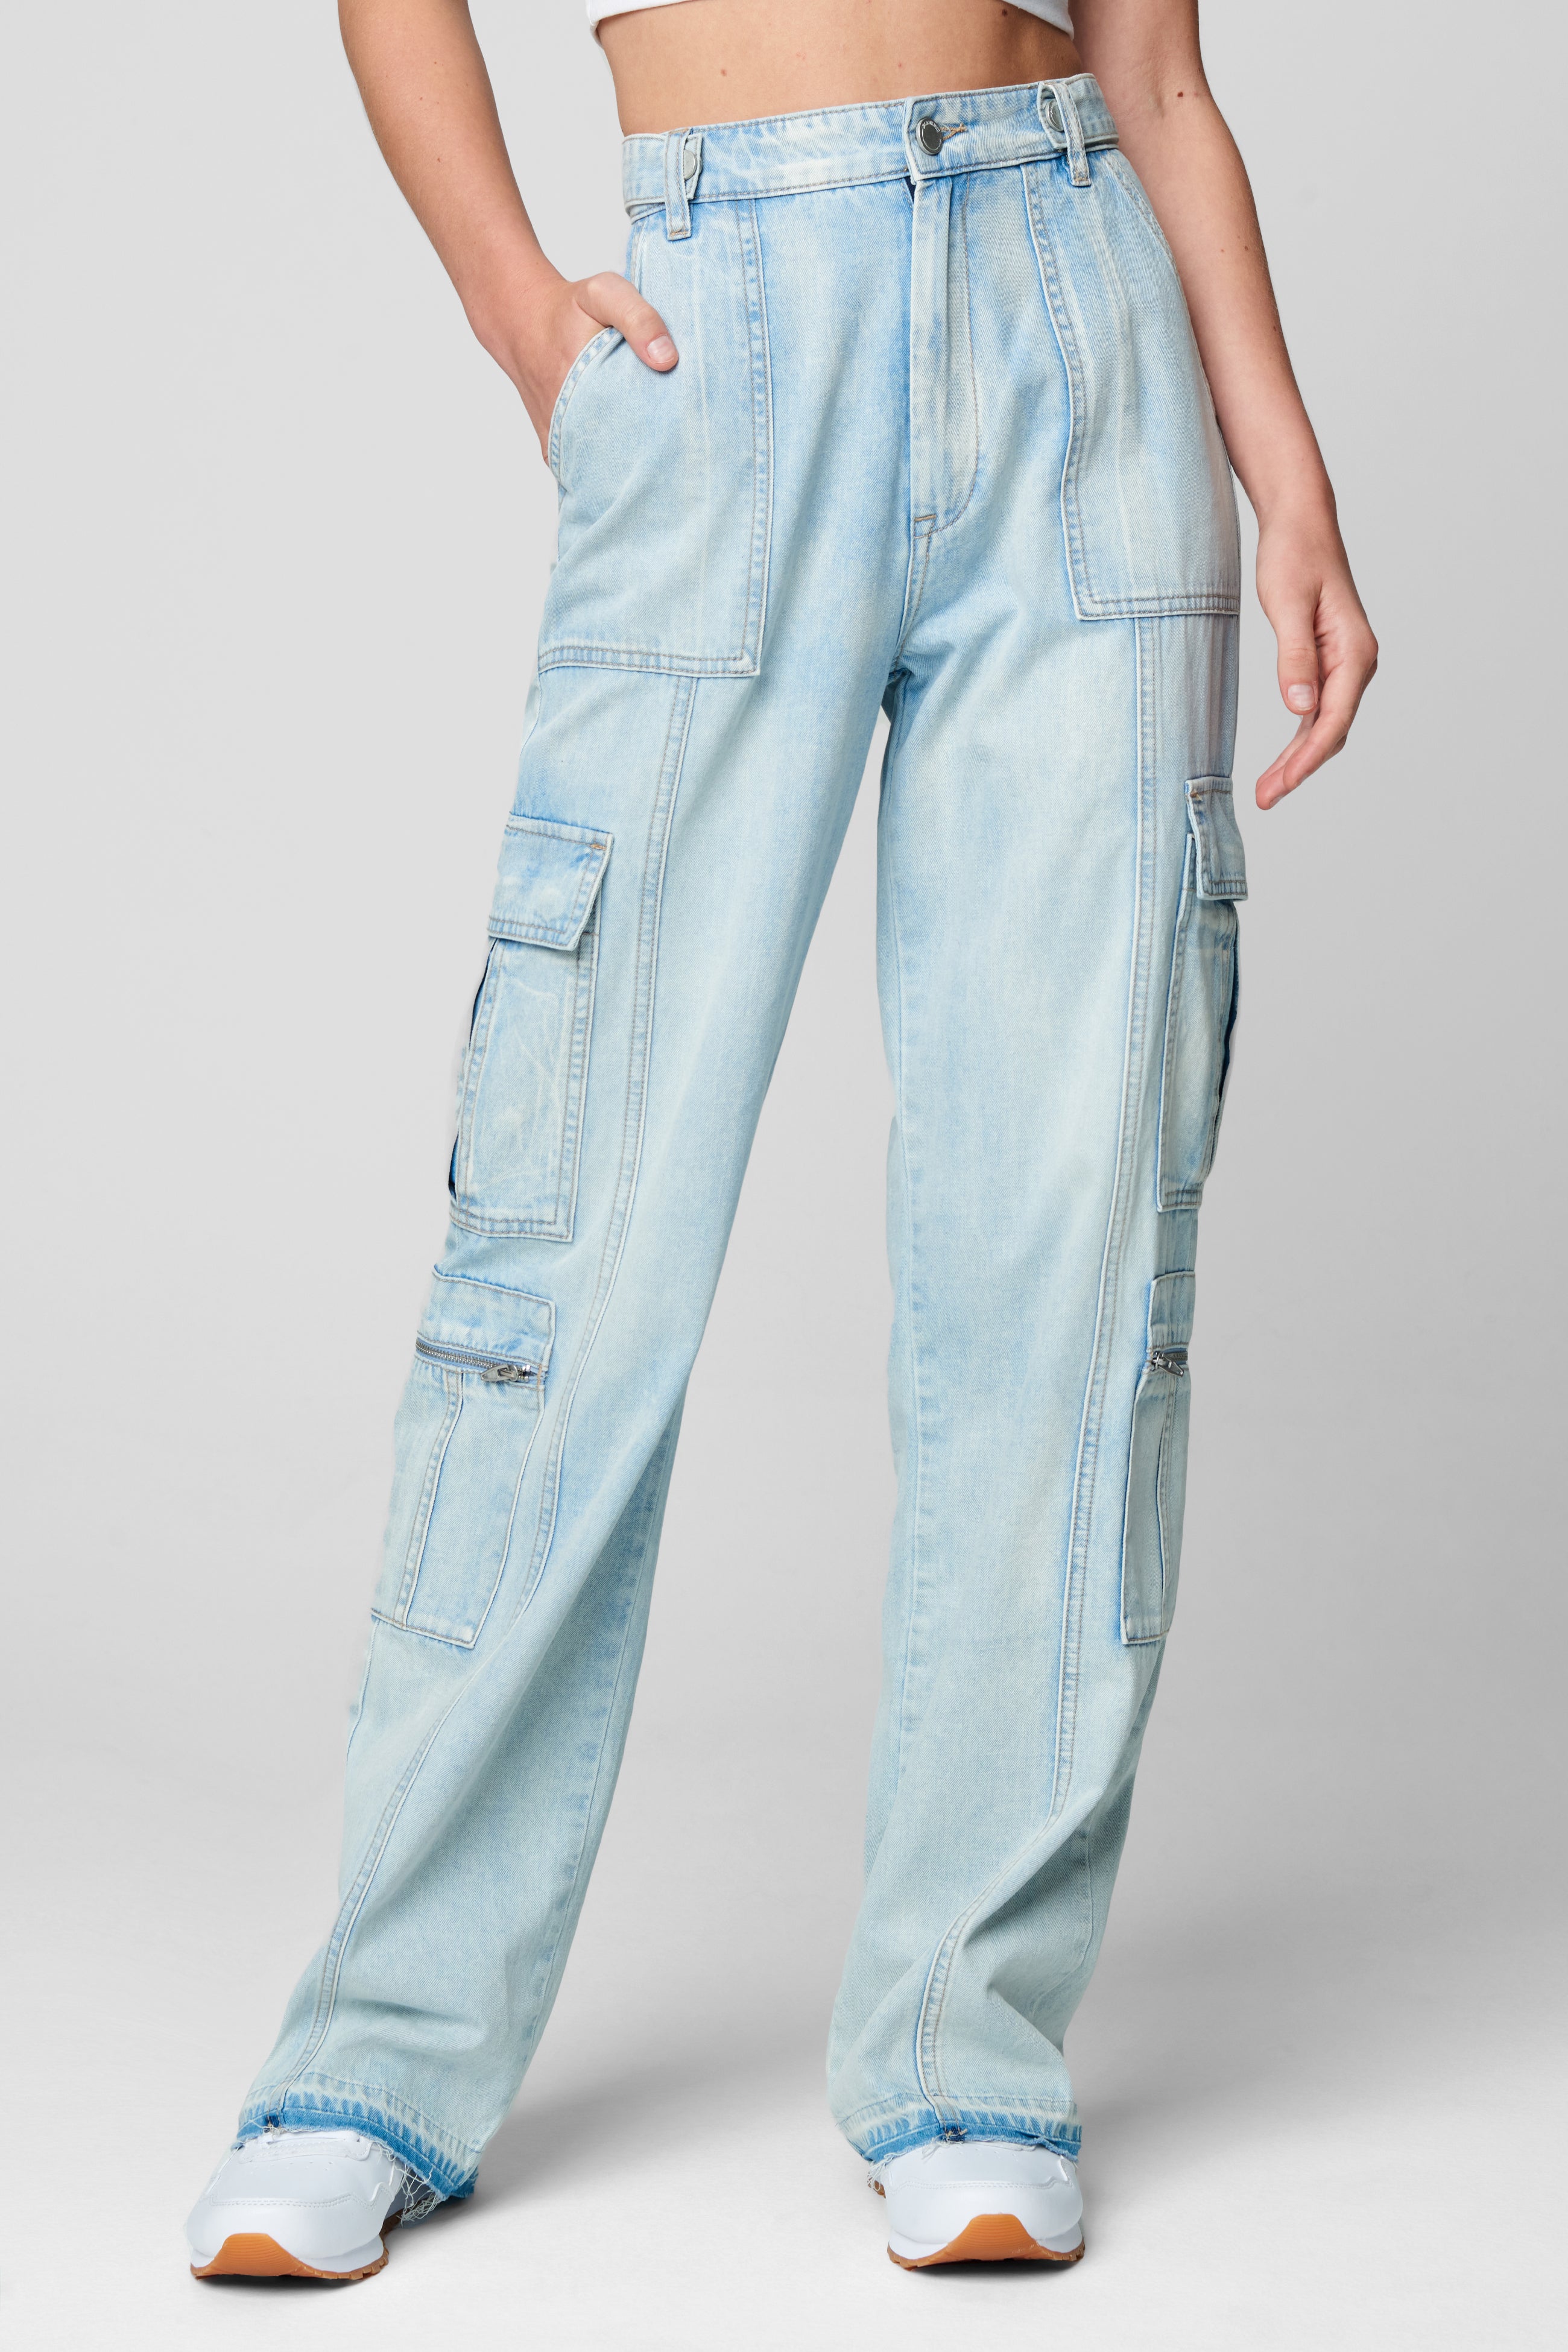 Call My Name Blue LIT Pants Cargo | Boutique